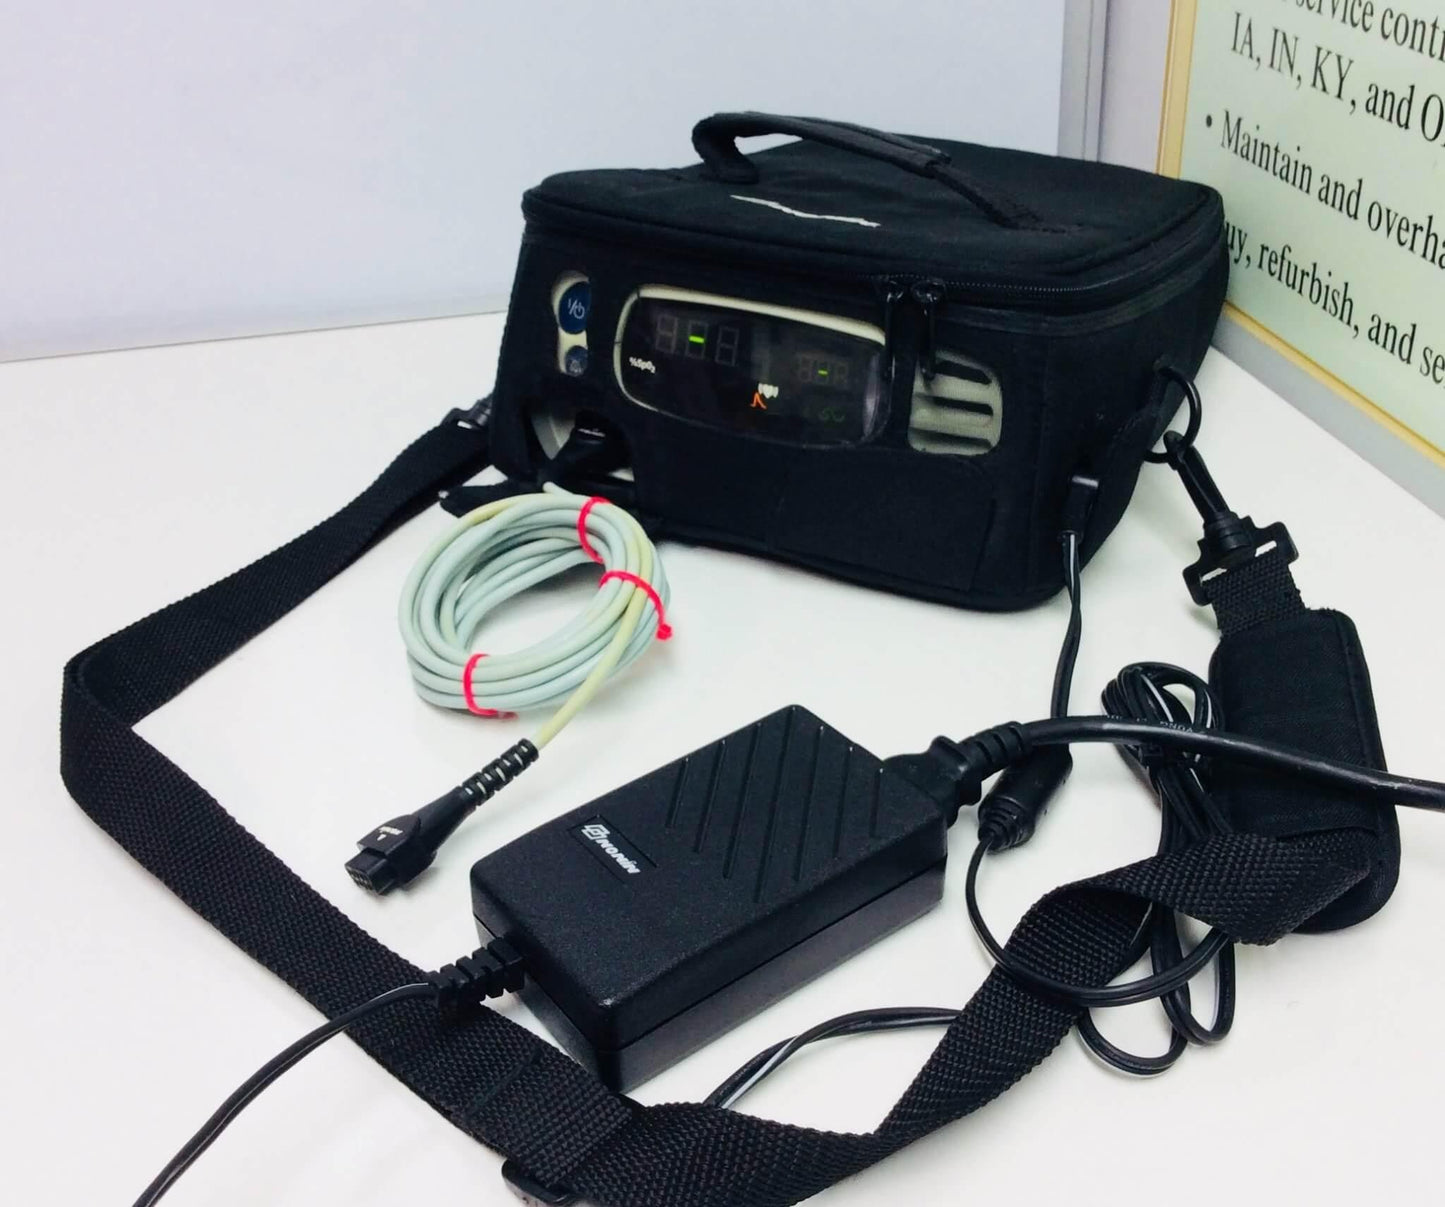 USED Nonin 7500 Pluse Oximeter IPX2 with Accessories Warranty FREE Shipping - MBR Medicals